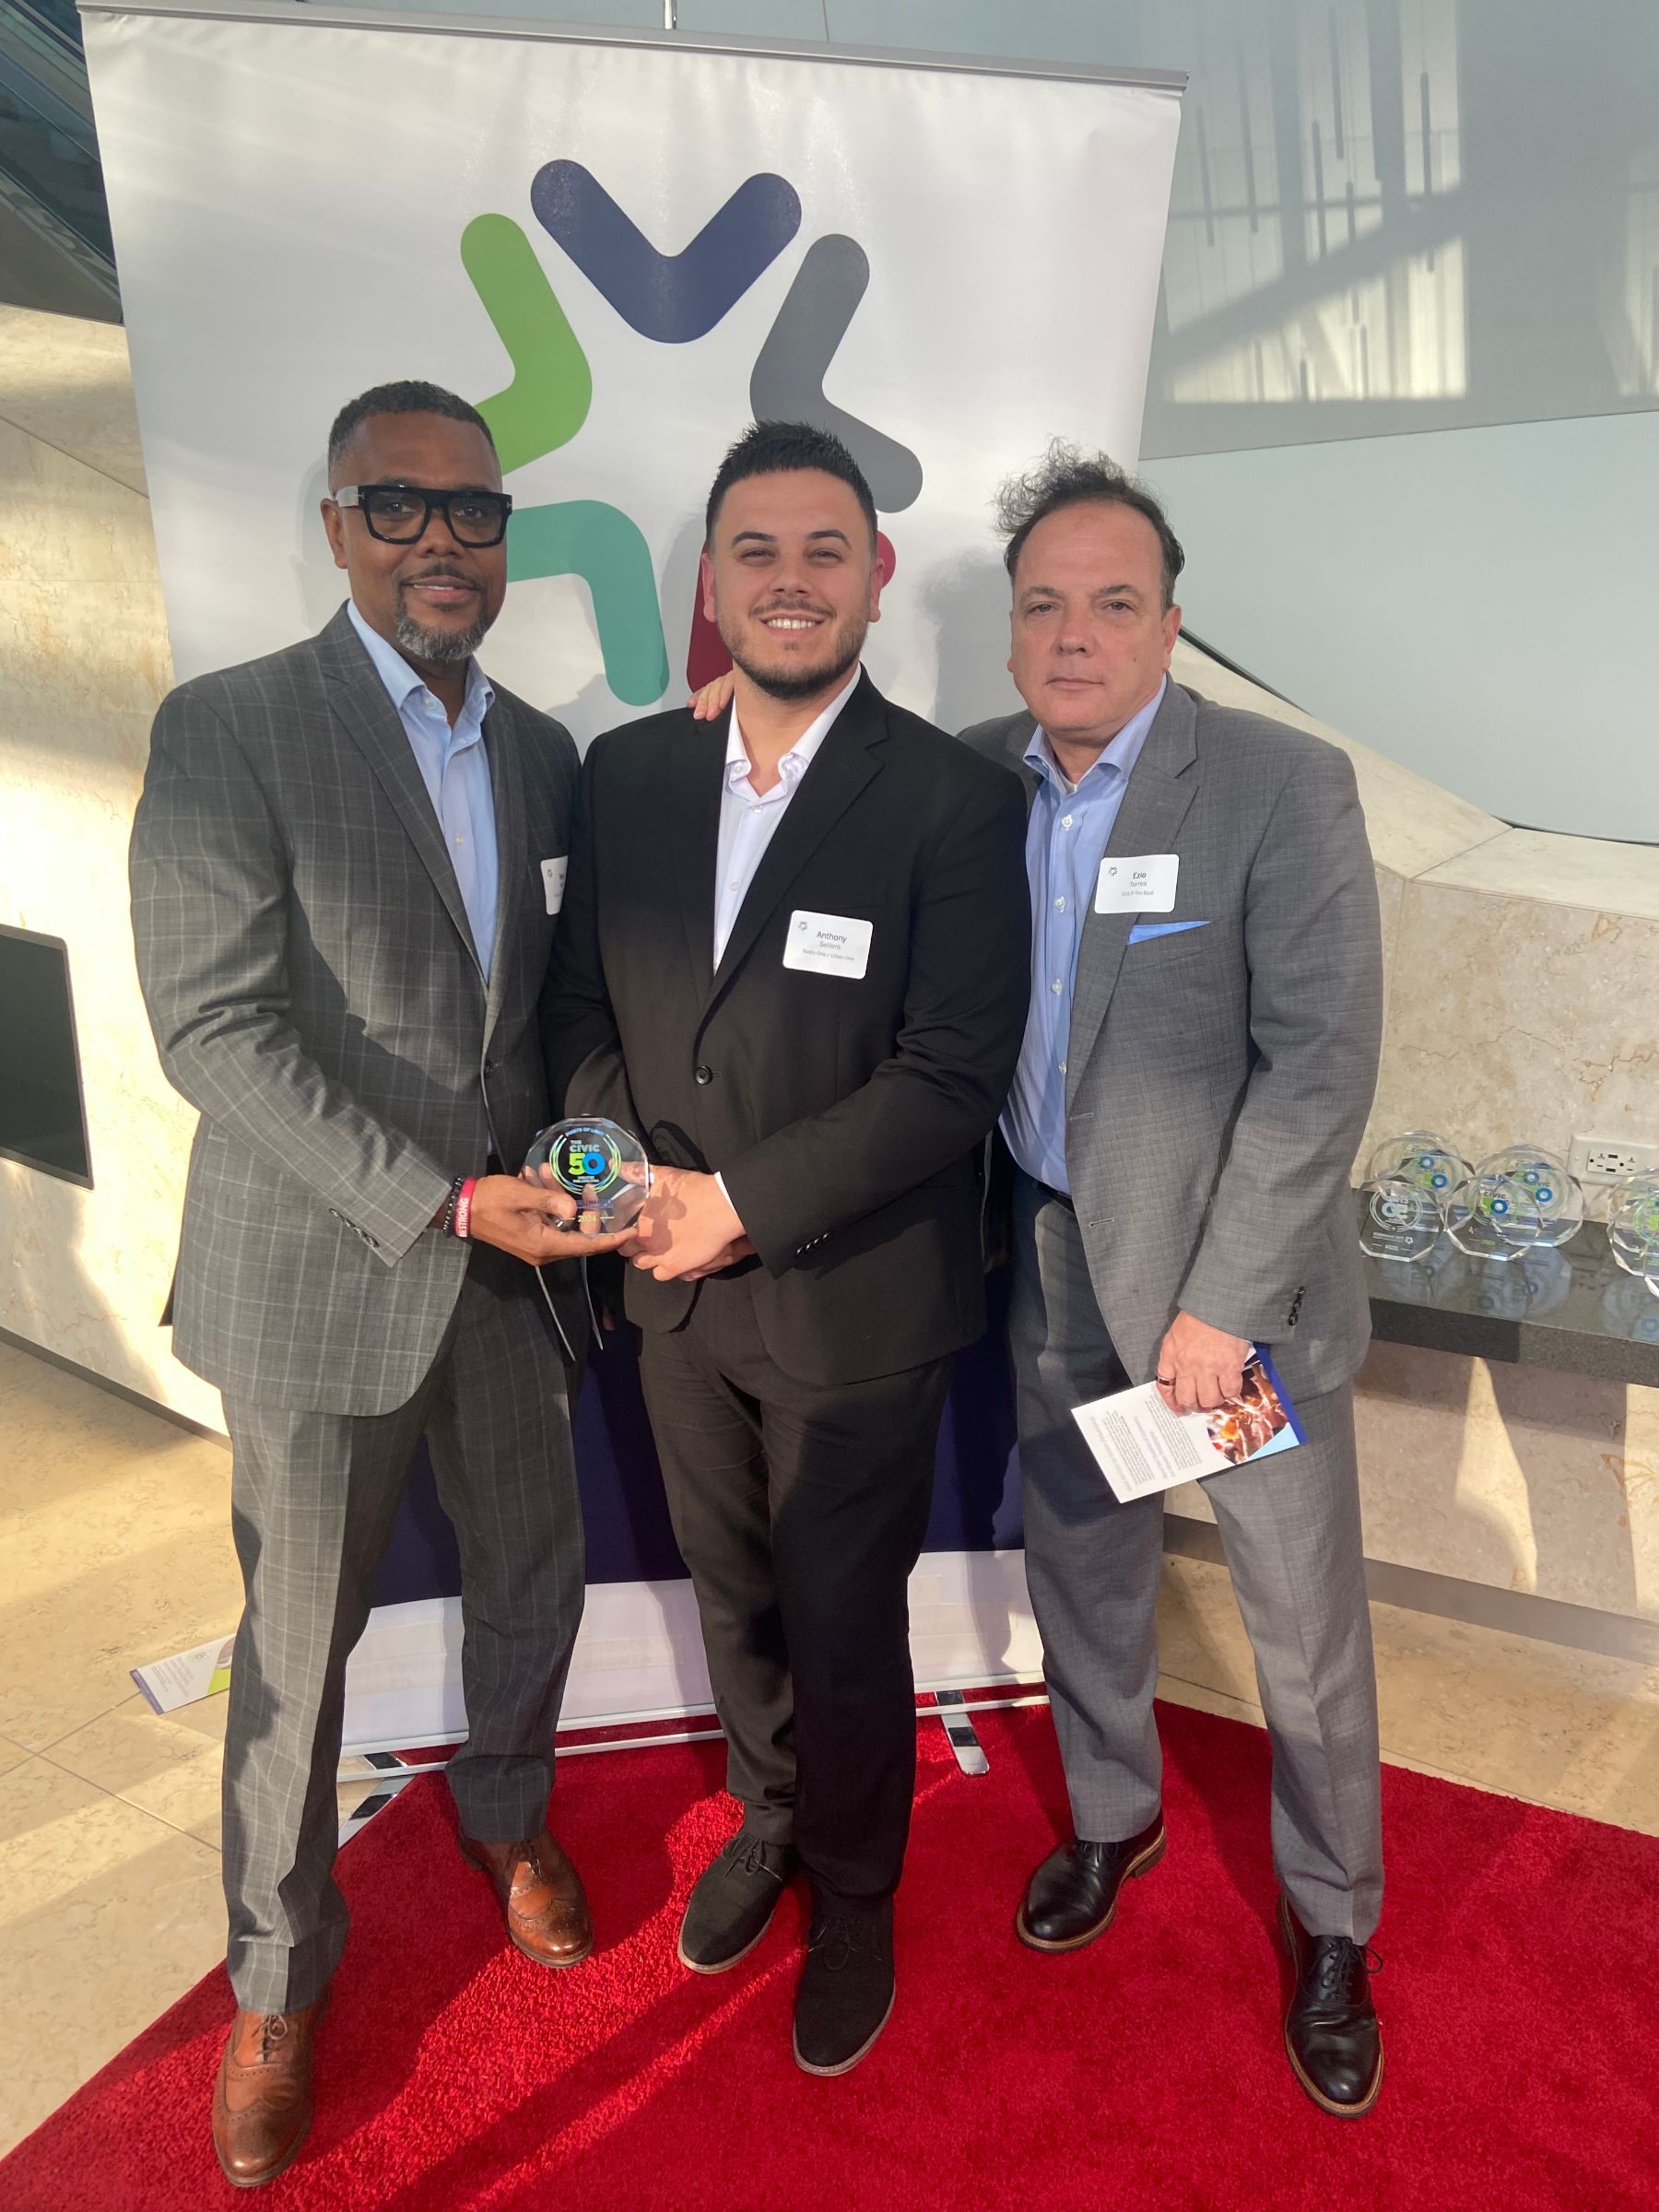 Urban One Philadelphia is awarded the Civic 50 Award accepted by Ezio Torres, Sean Sams, and Anthony Sellers